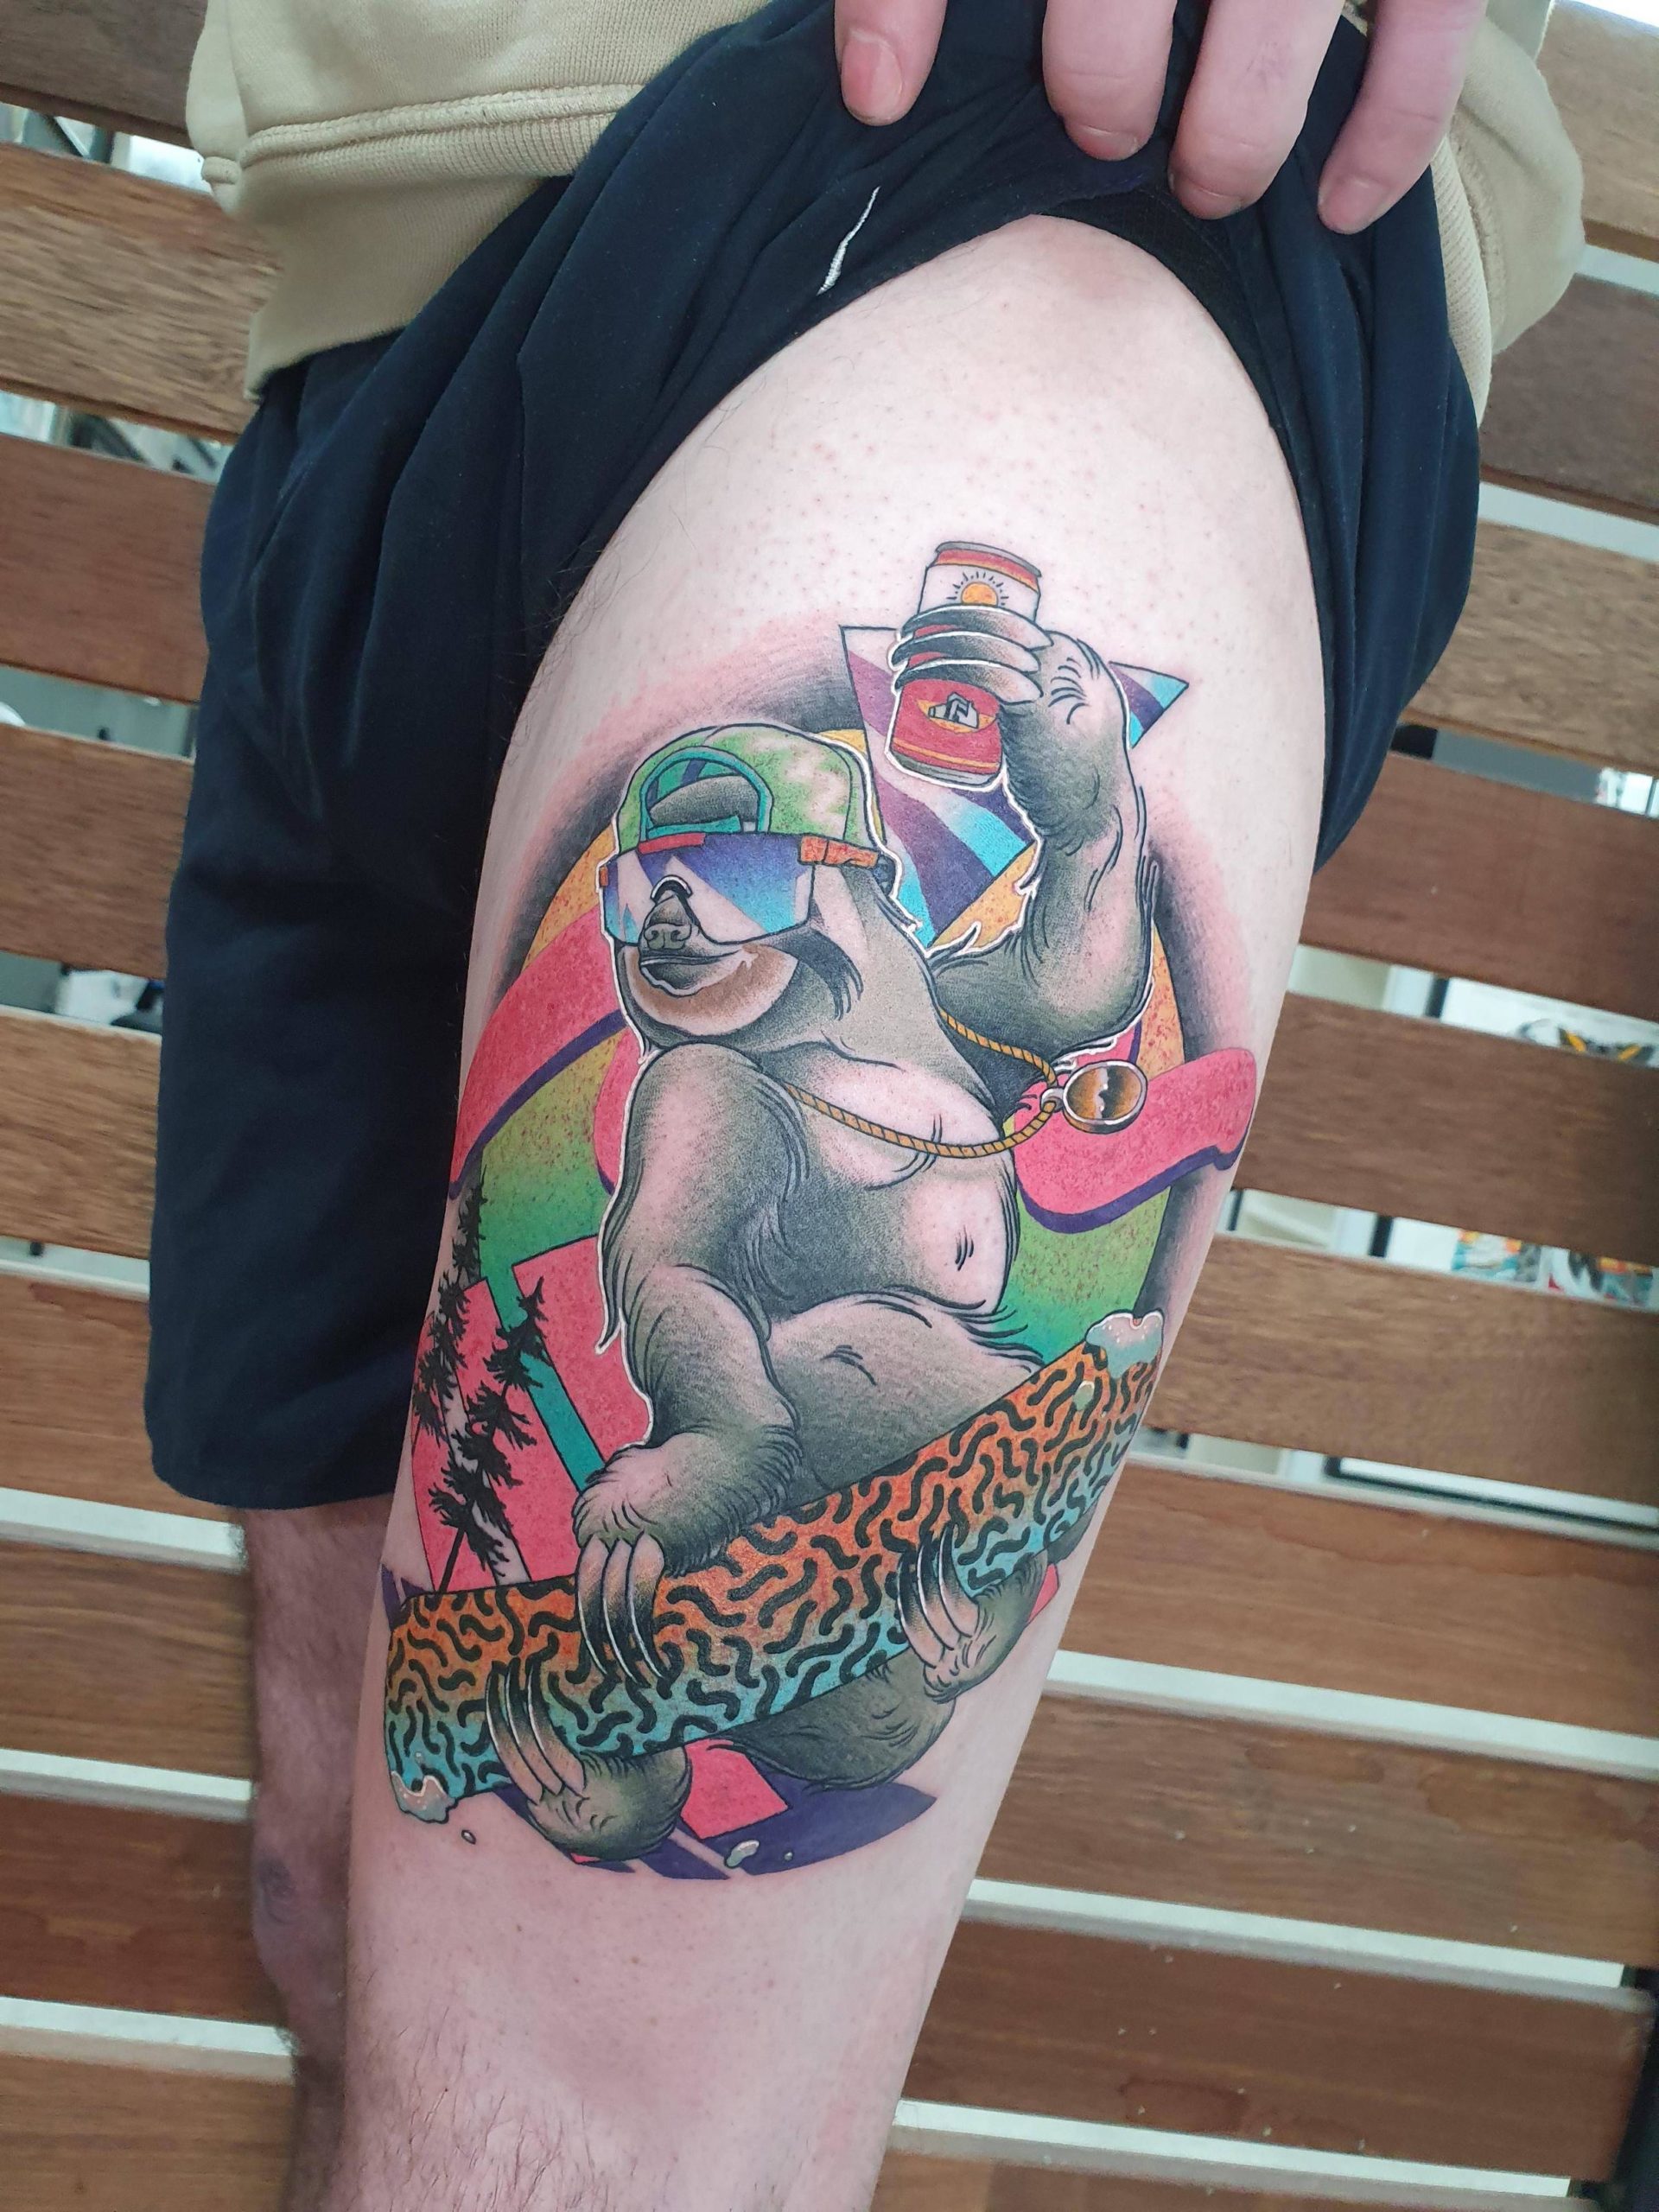 The Best 10 Tattoo near WestOak in Vancouver, BC - Yelp